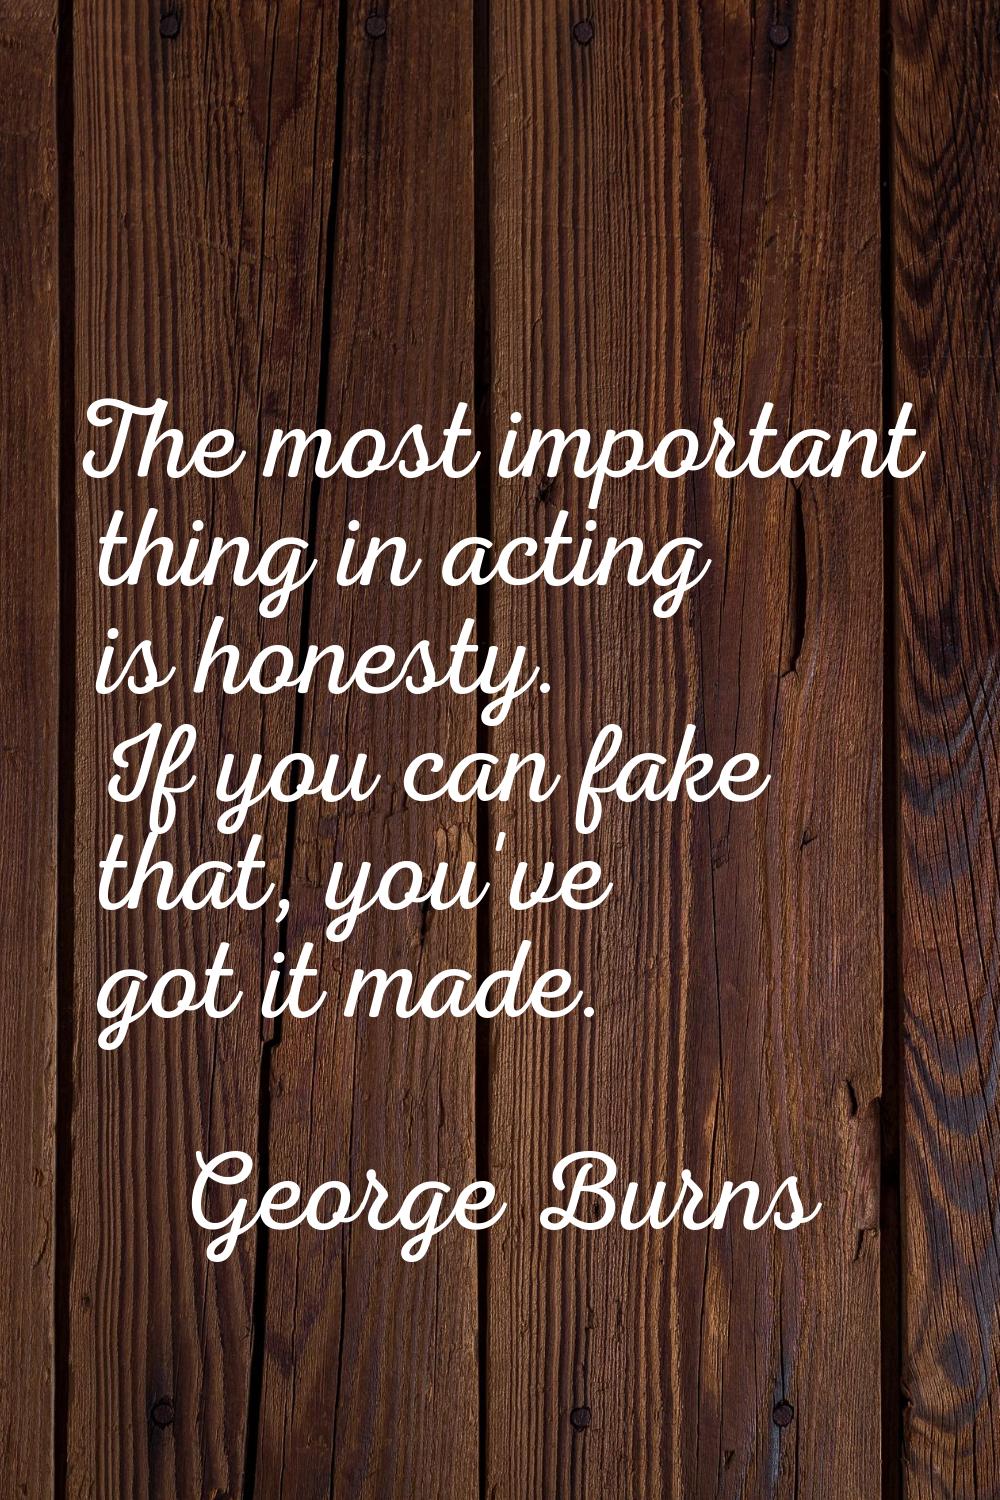 The most important thing in acting is honesty. If you can fake that, you've got it made.